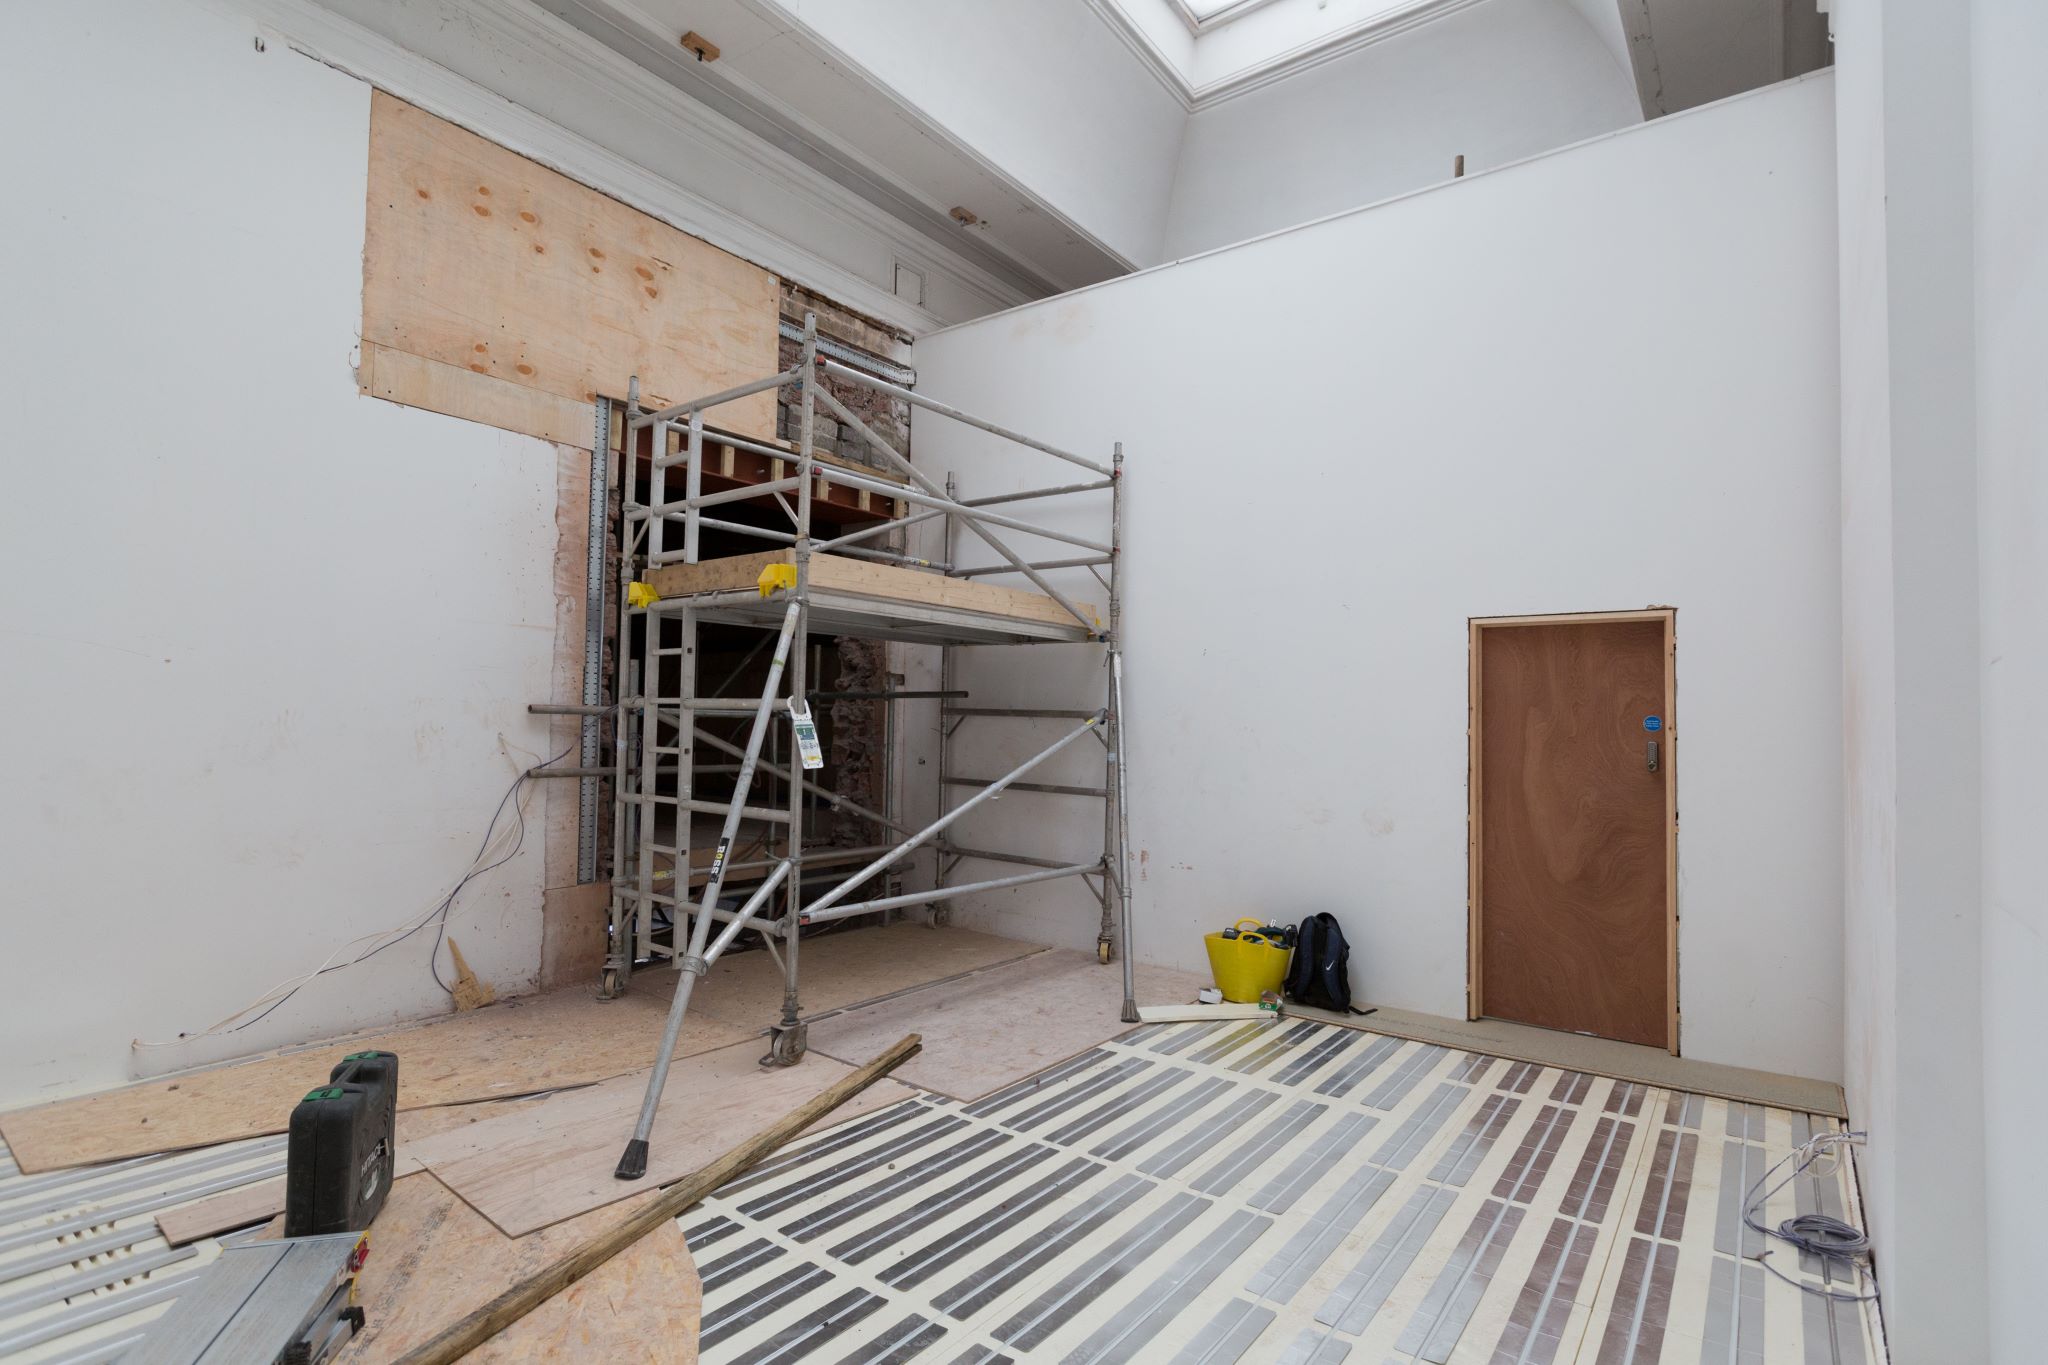 A room with flooring being installed and scaffolding at the far side 